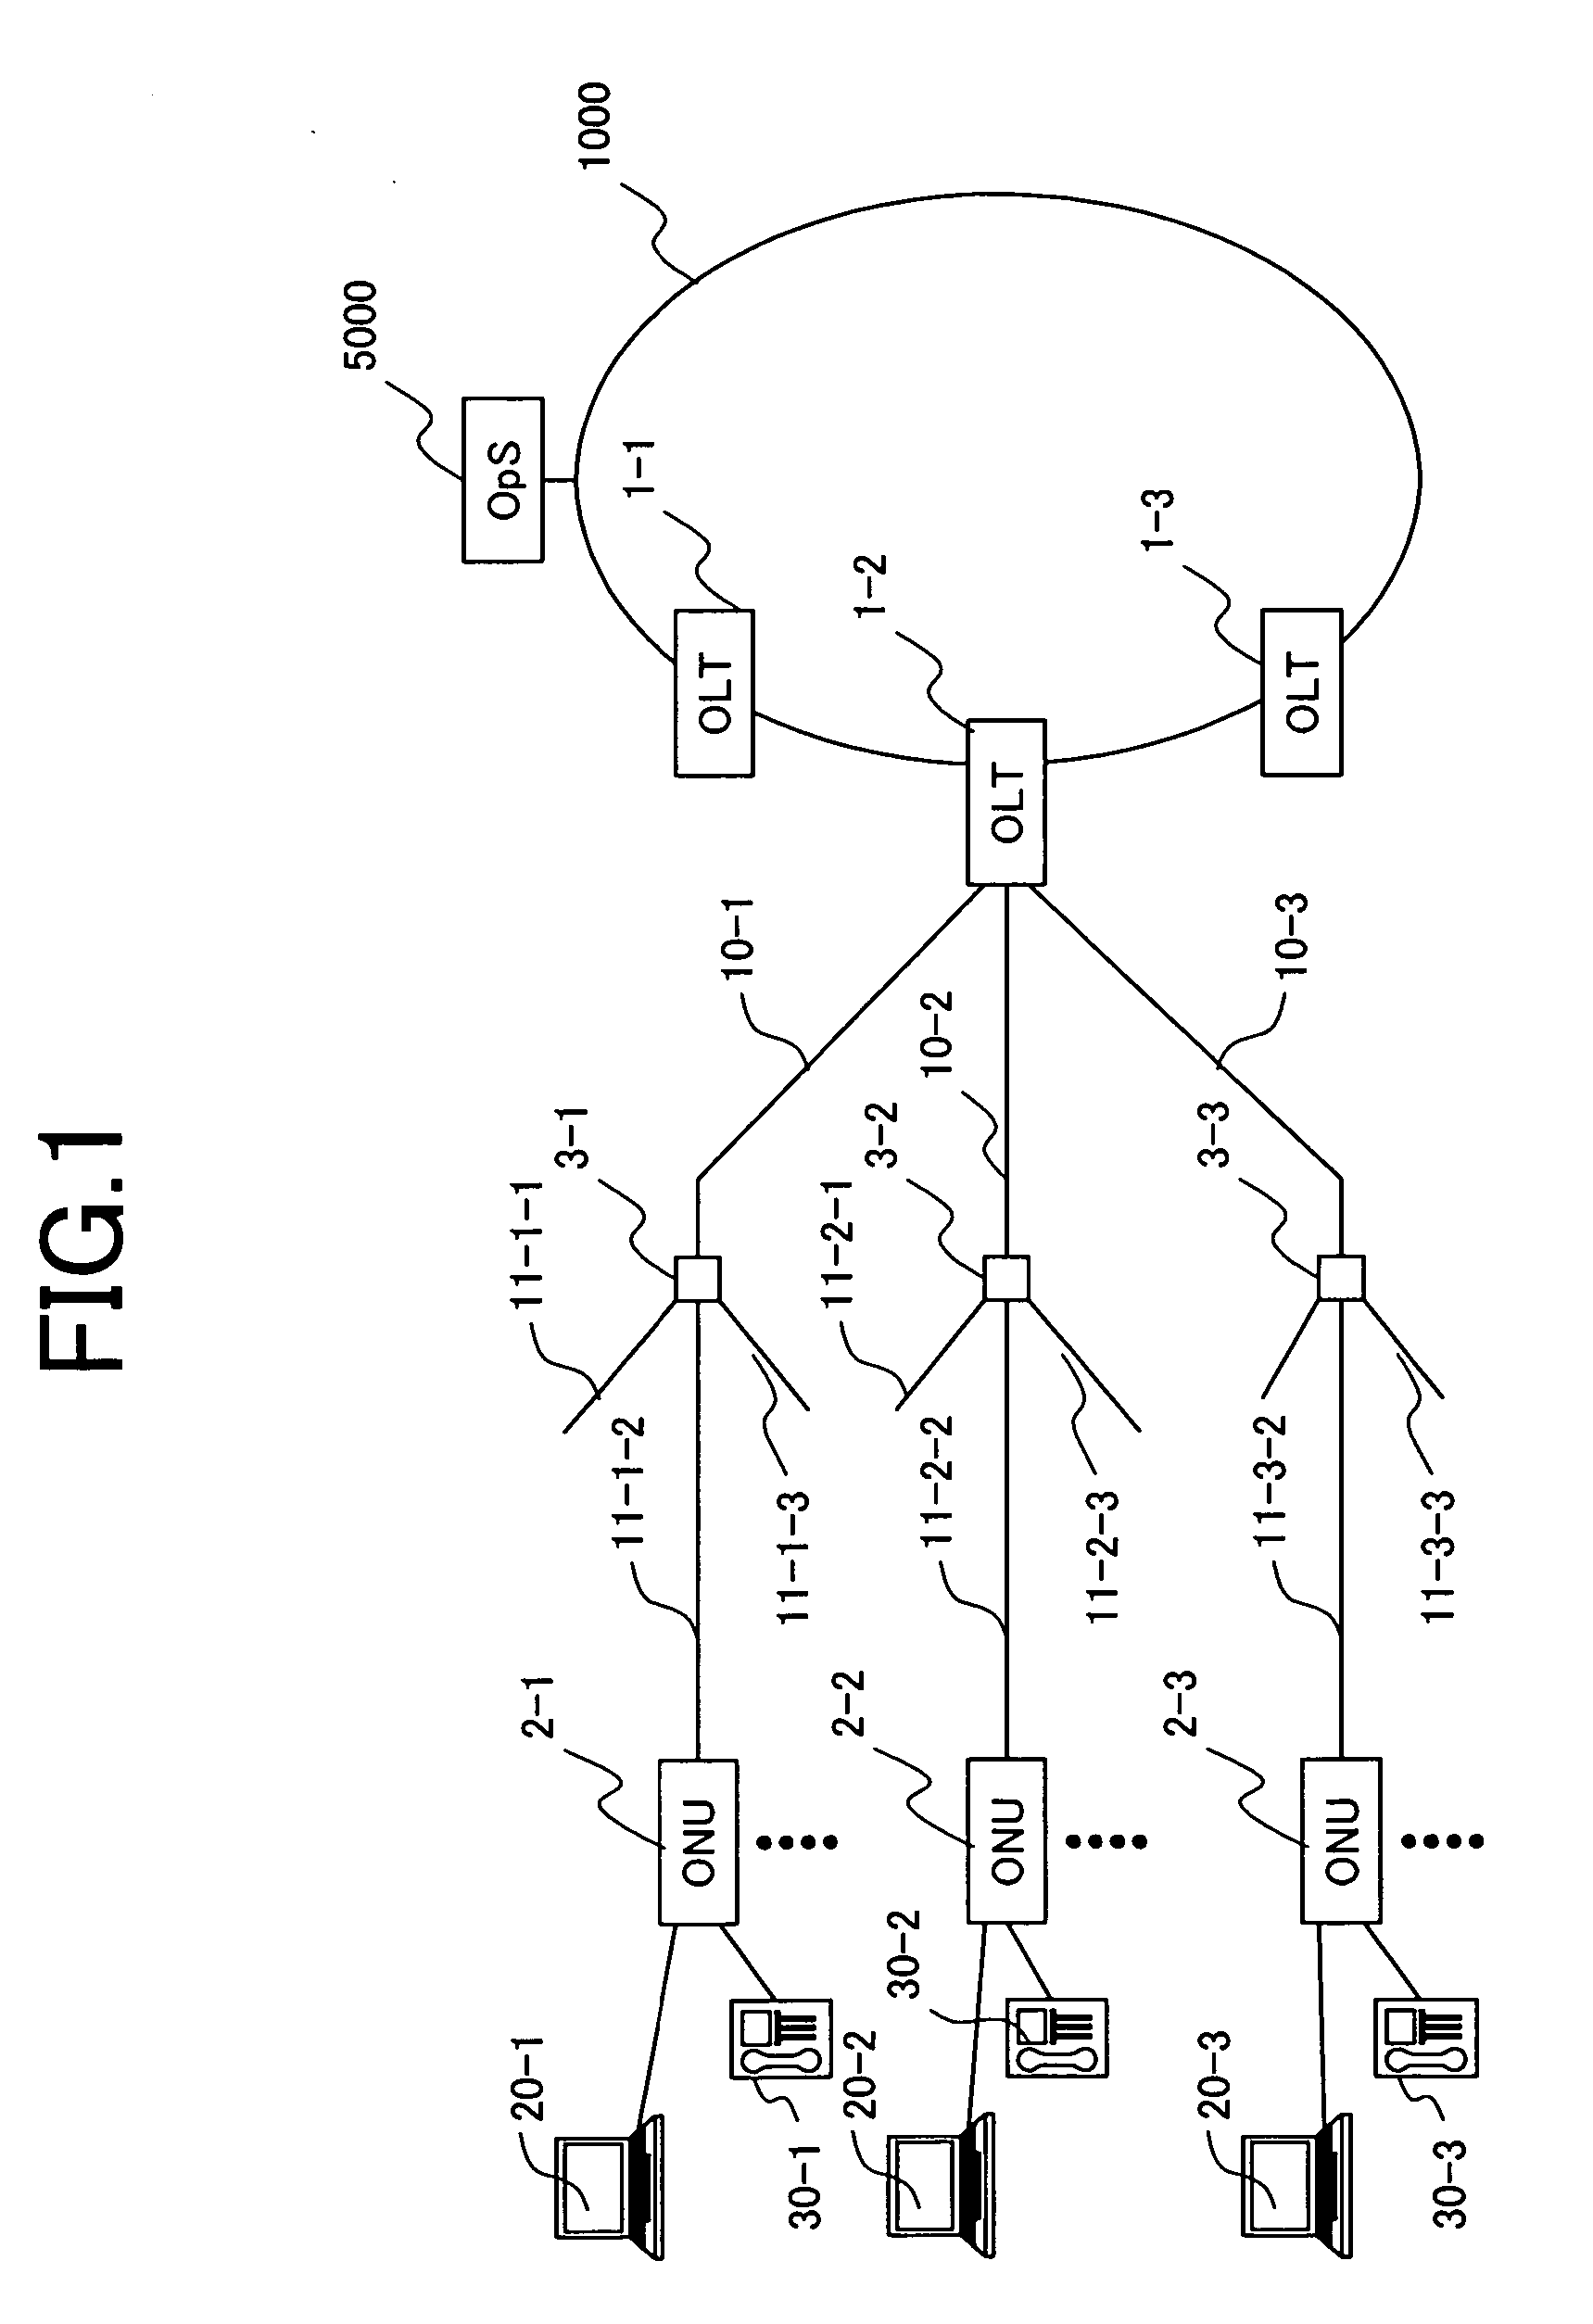 Transmission apparatus with function of multi-step bandwidth assignment to other communication apparatuses